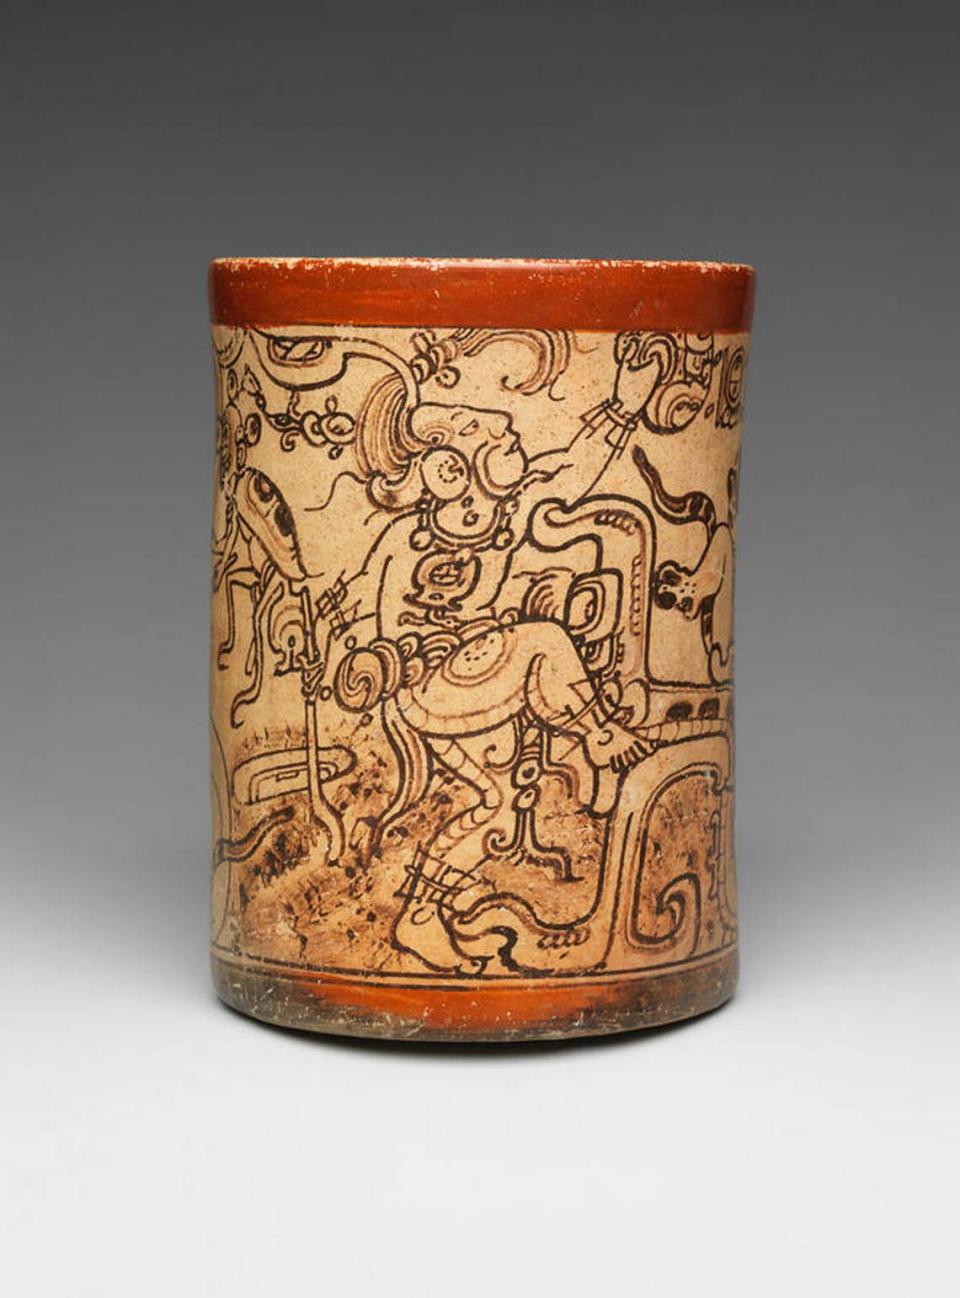 A vessel with a mythological scene, attributed to the “Metropolitan Painter,” a Maya painter active 7th or 8th century, on display at the Kimbell Art Museum.